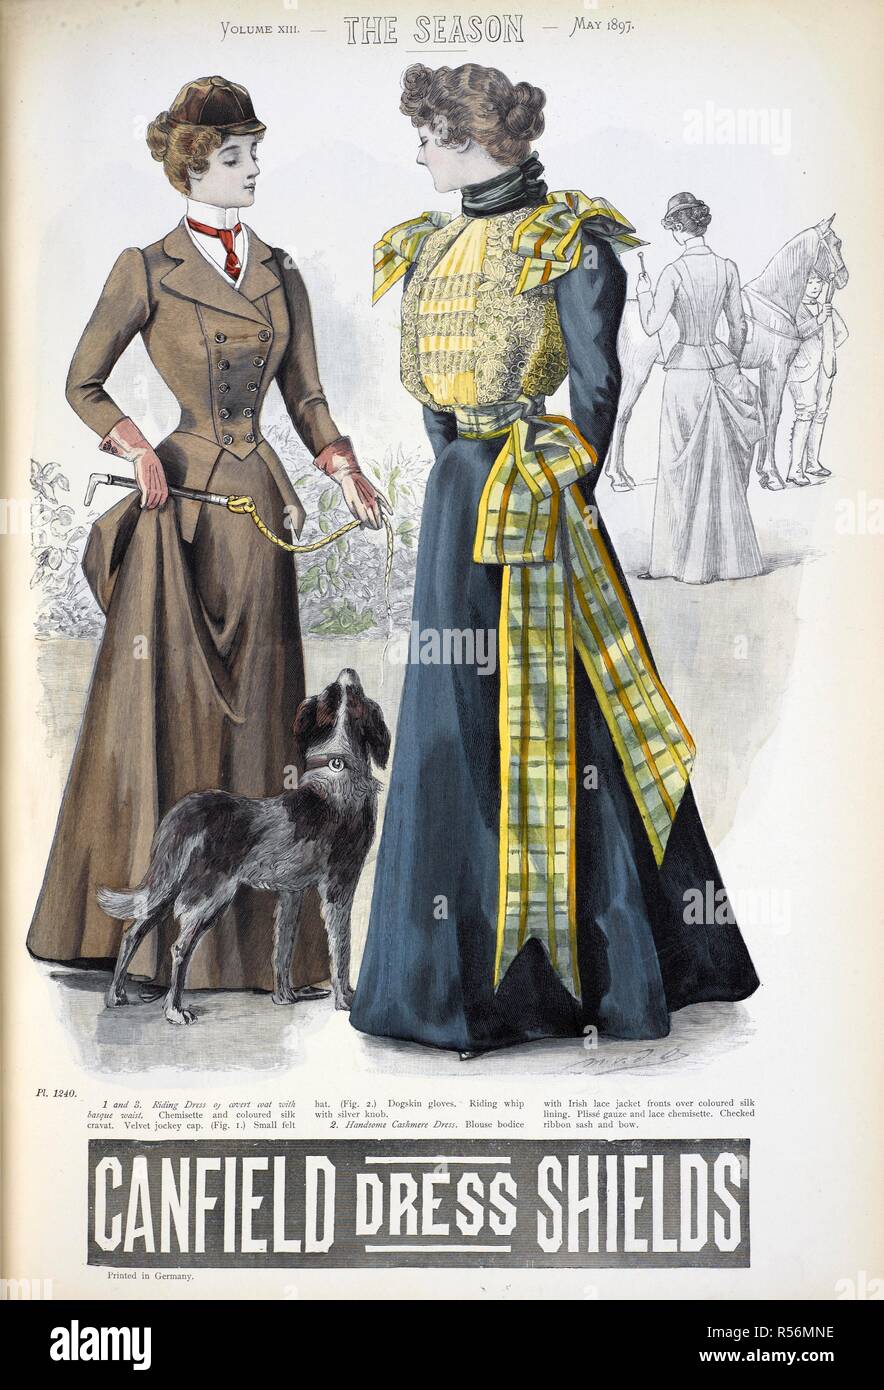 Left figure: Riding dress of covert coat with basque waist; Chemisette and coloured silk cravat; Velvet jockey cap; dogskin gloves; and, riding whip with silver knob. Right figure: Handsome cashmere dress. Blouse bodice with Irish lace jacket fronts over coloured silk lining. PlizzÃ© gauze and lace chemisette. Checked ribbon sash and bow. . The Season : Lady's illustrated magazine. London, England : 1897. Source: The Season: Lady's illustrated magazine. vol.XIII. Pl.1240. Stock Photo